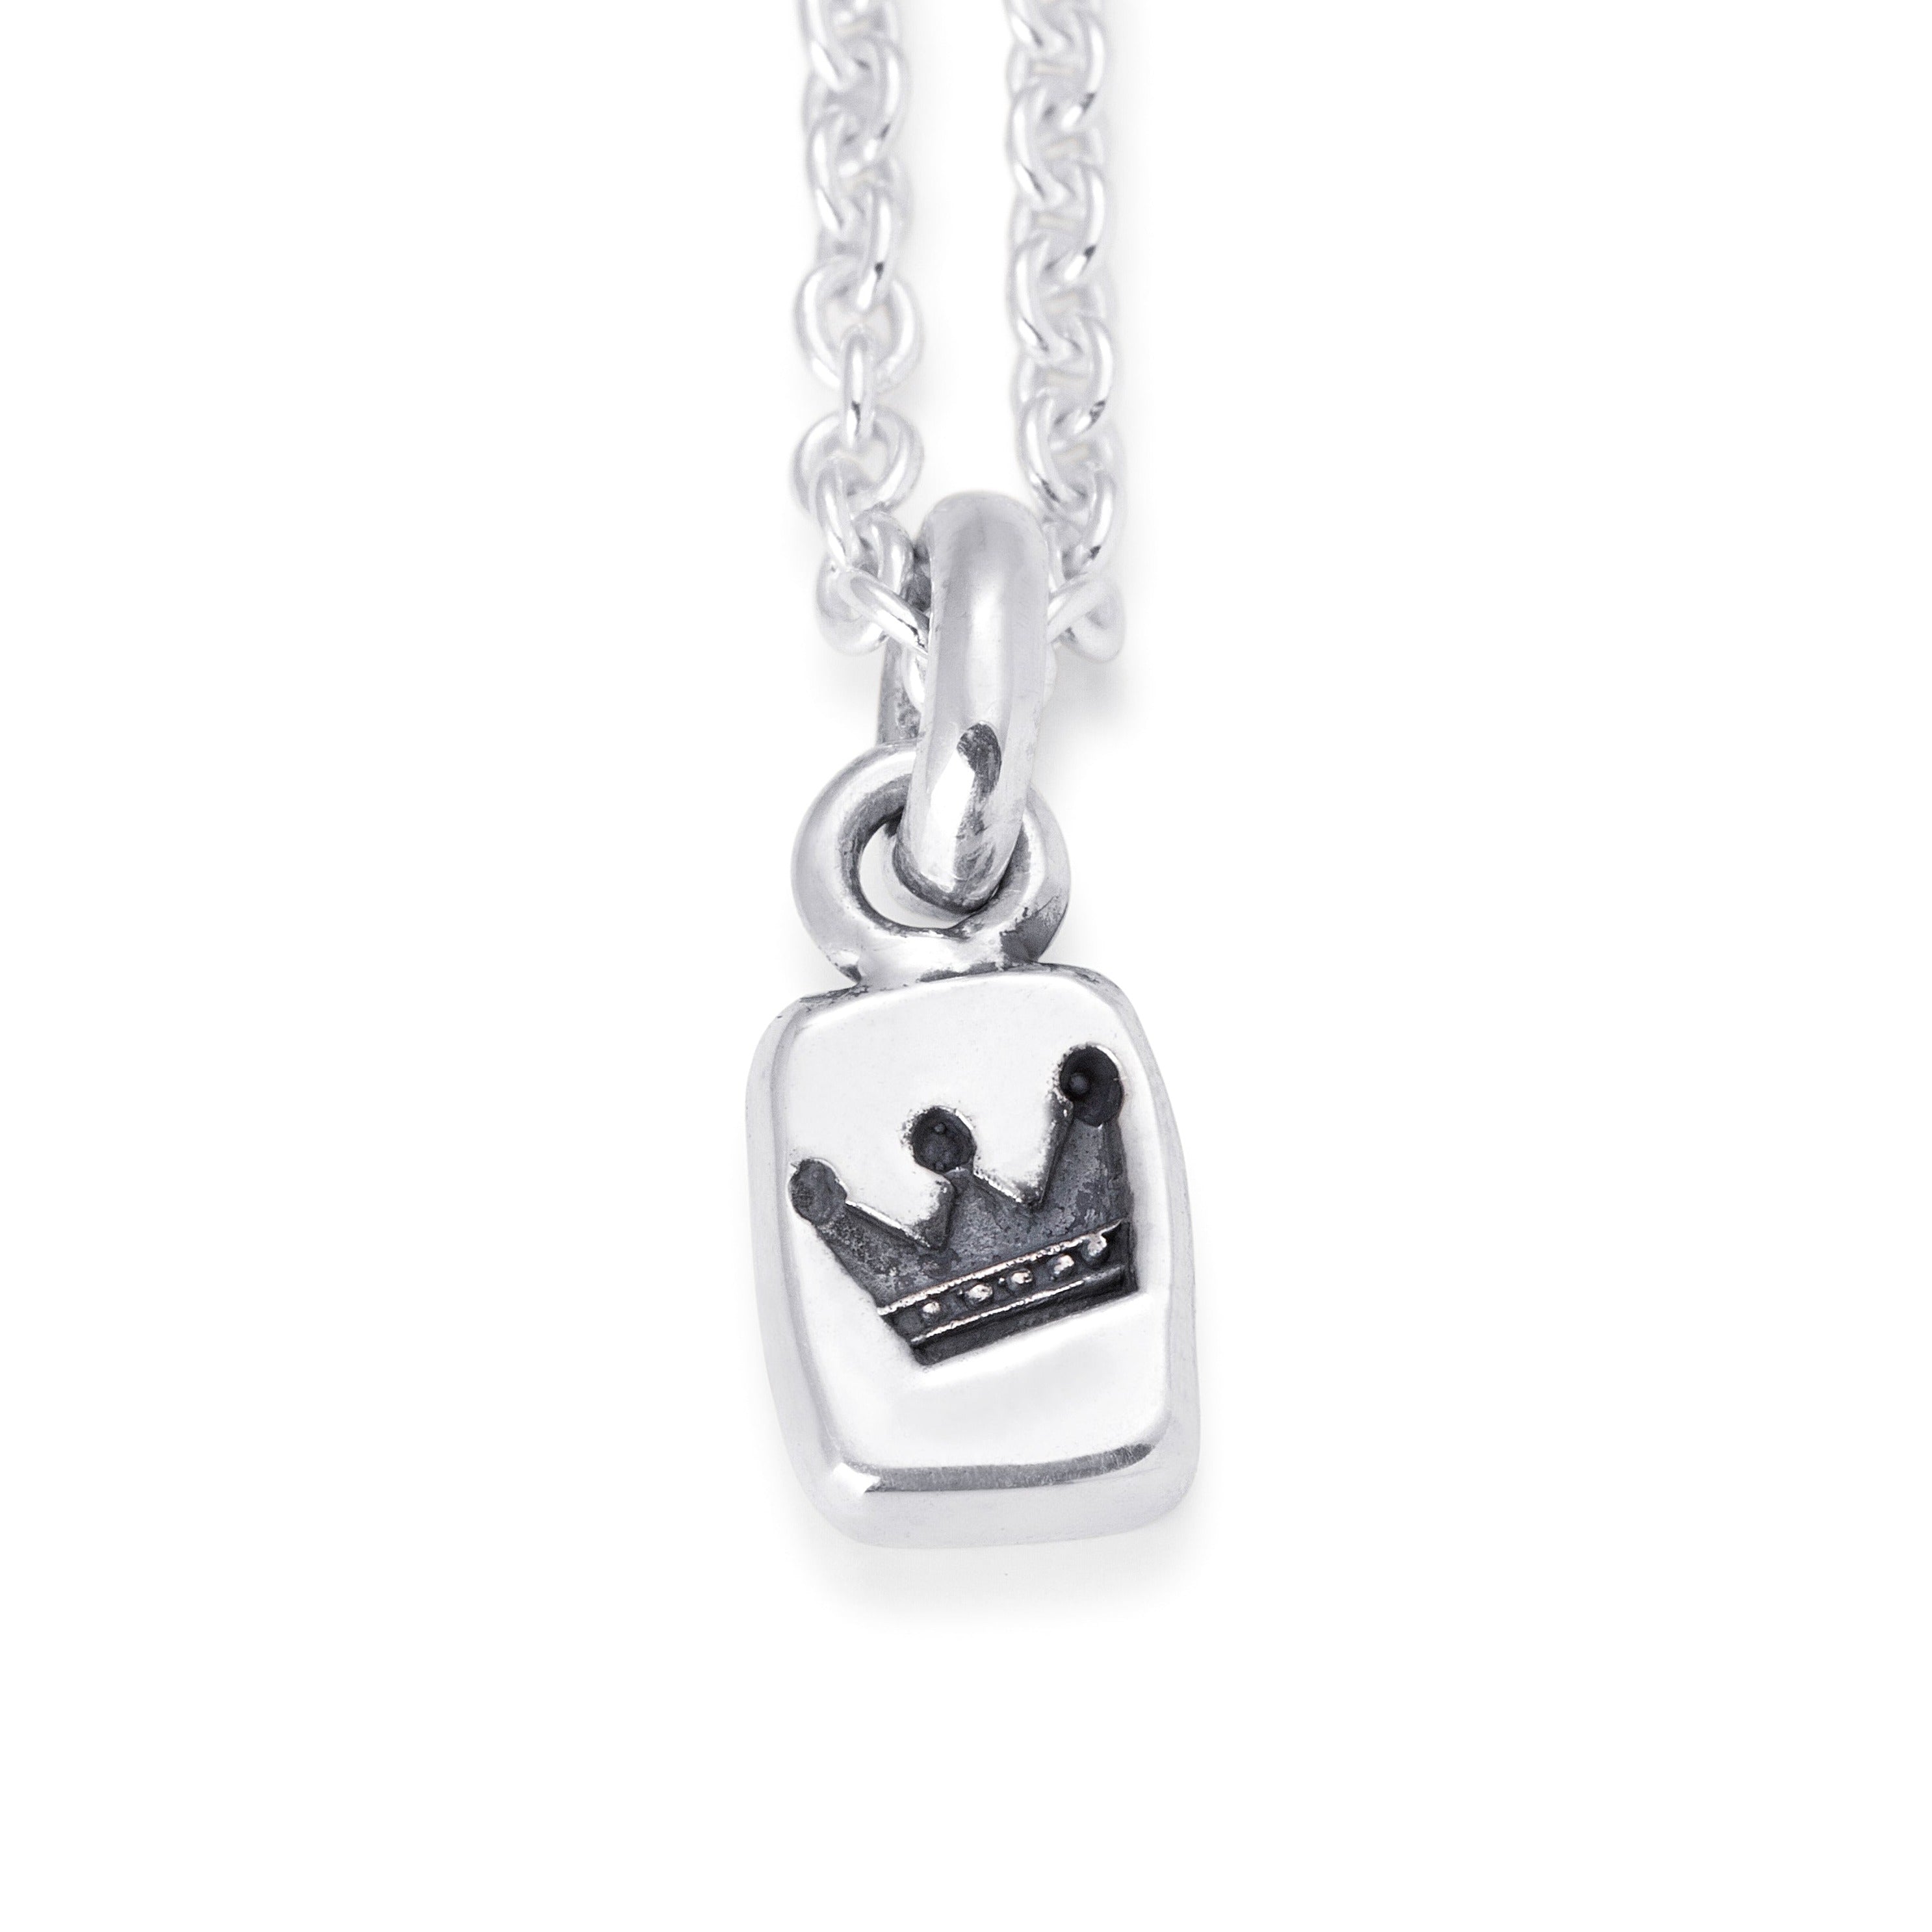 Solid Sterling Silver tablet style pendant stamped with a crown design.